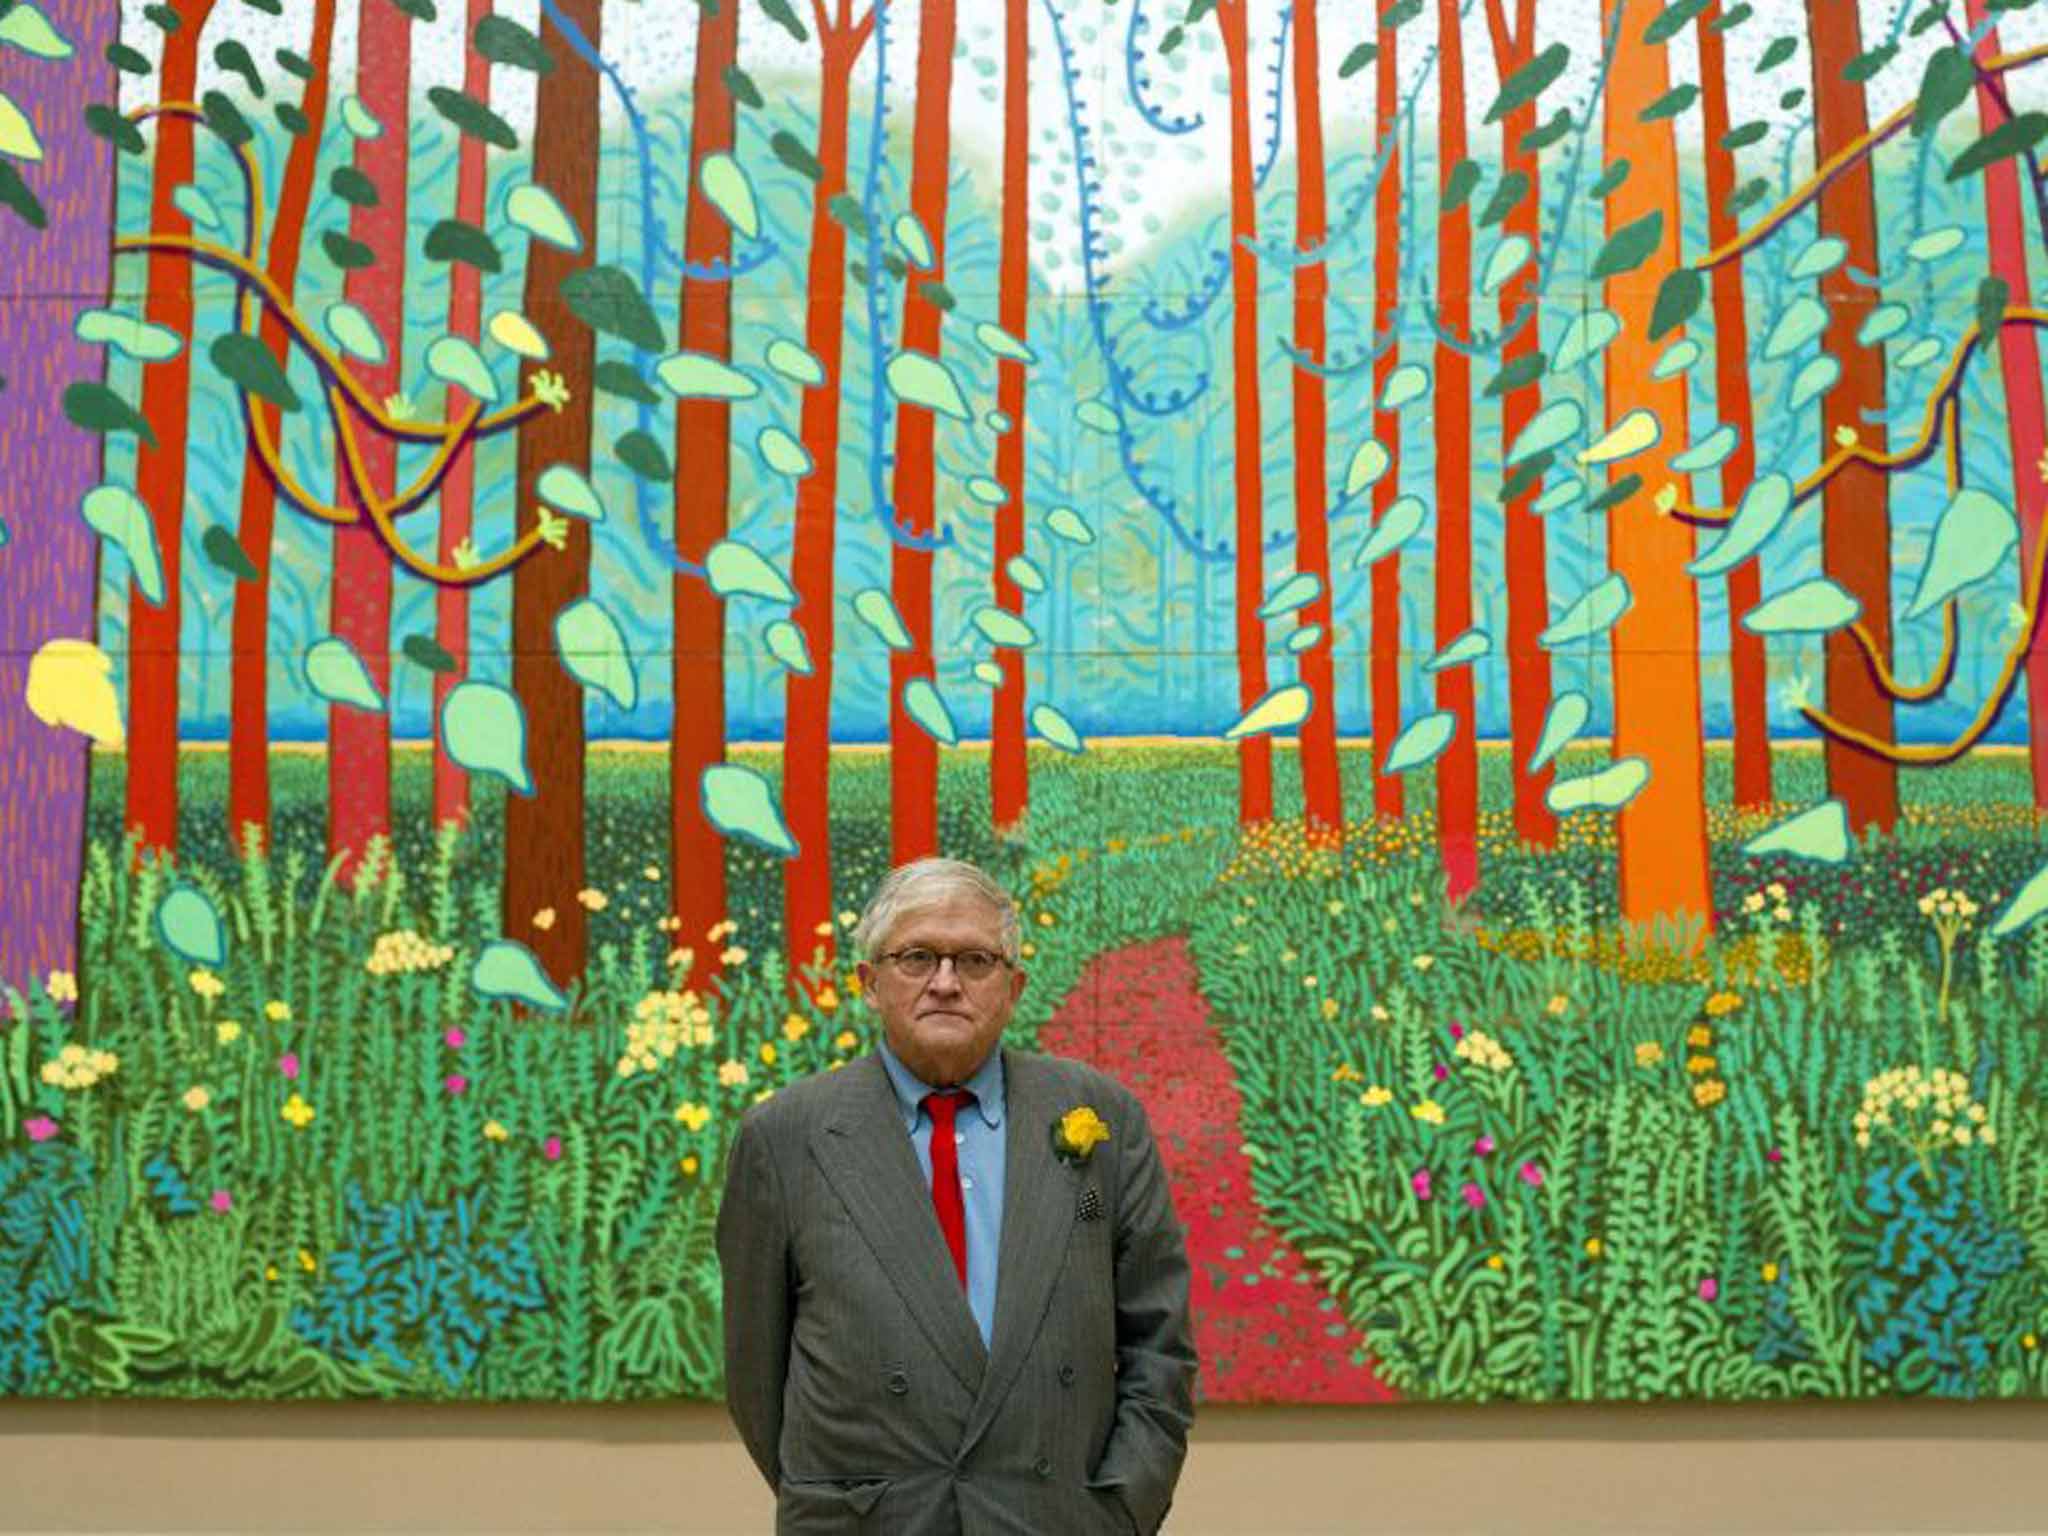 David Hockney is pro fracking: 'We can go on and on about oil, but